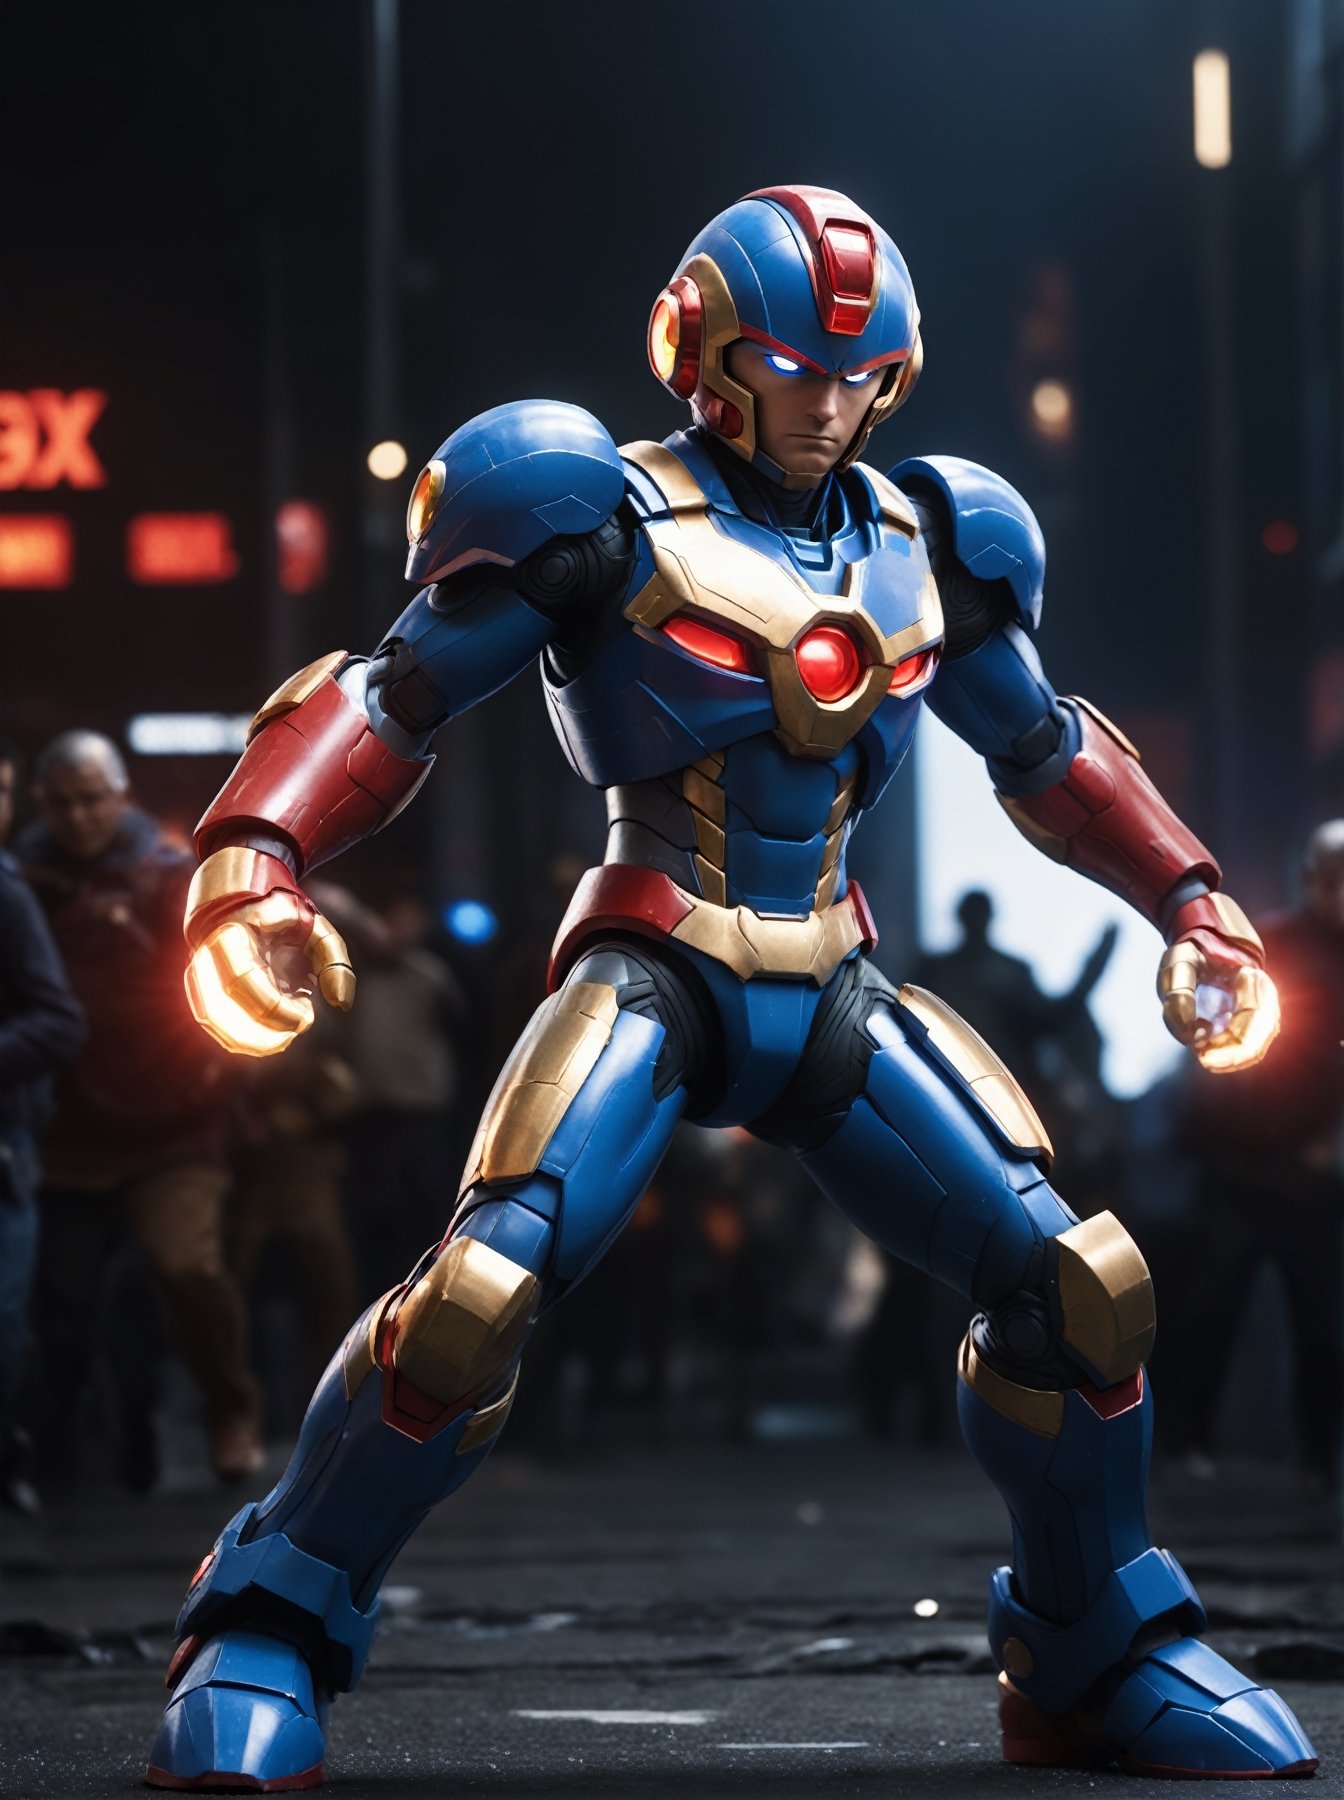 candid 16k photo of Mega Man X dashing in to save the day, his armor is blue and grey with red lights plus white and gold details dramatic lighting, cinematic colors, cinema quality, aw0k magnstyle